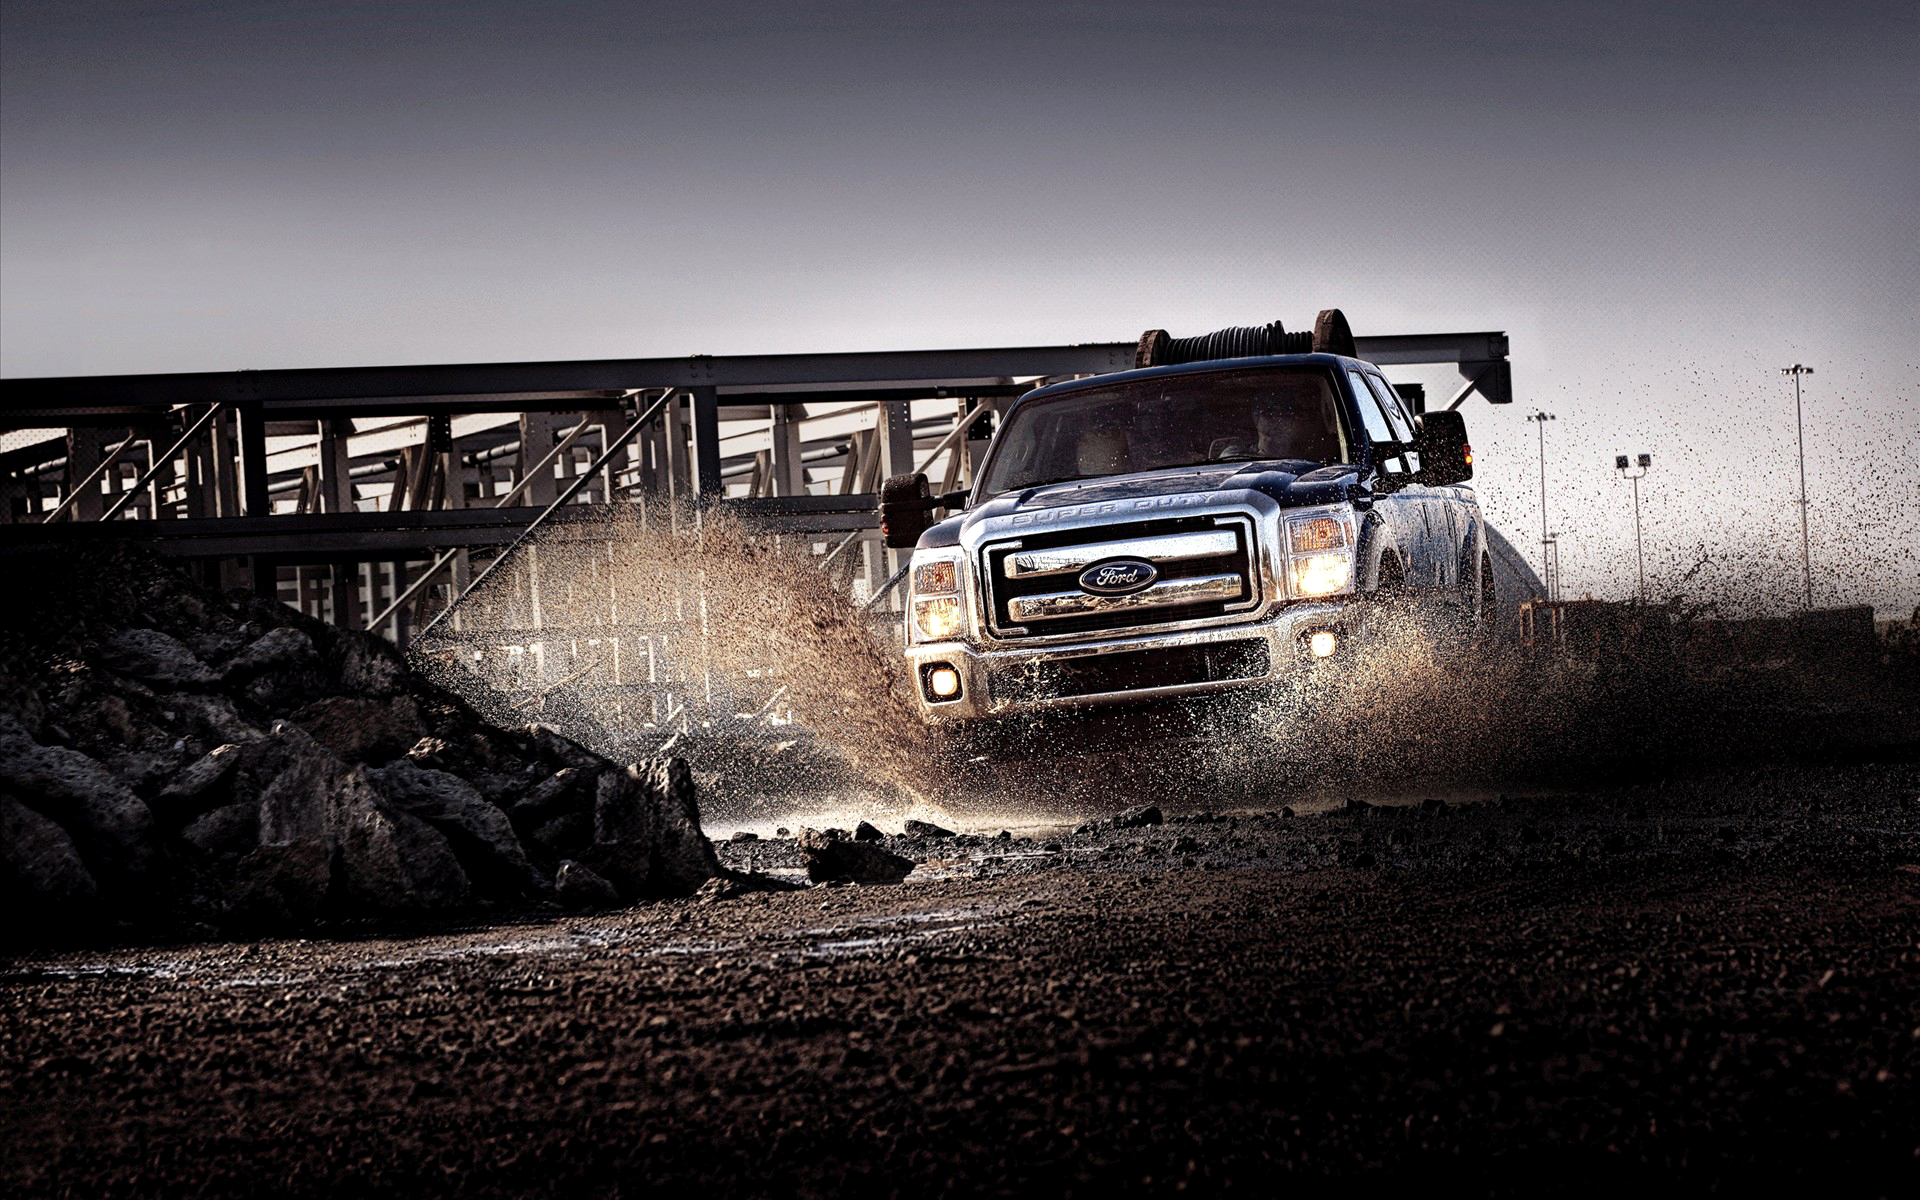 Ford Truck Wallpaper Cars Wallpapers 1148 Ilikewalls Reviewed by Car Wallpapers on 21st June 2015 . Article about Ford Truck Wallpaper Cars Wallpapers 1148 ...